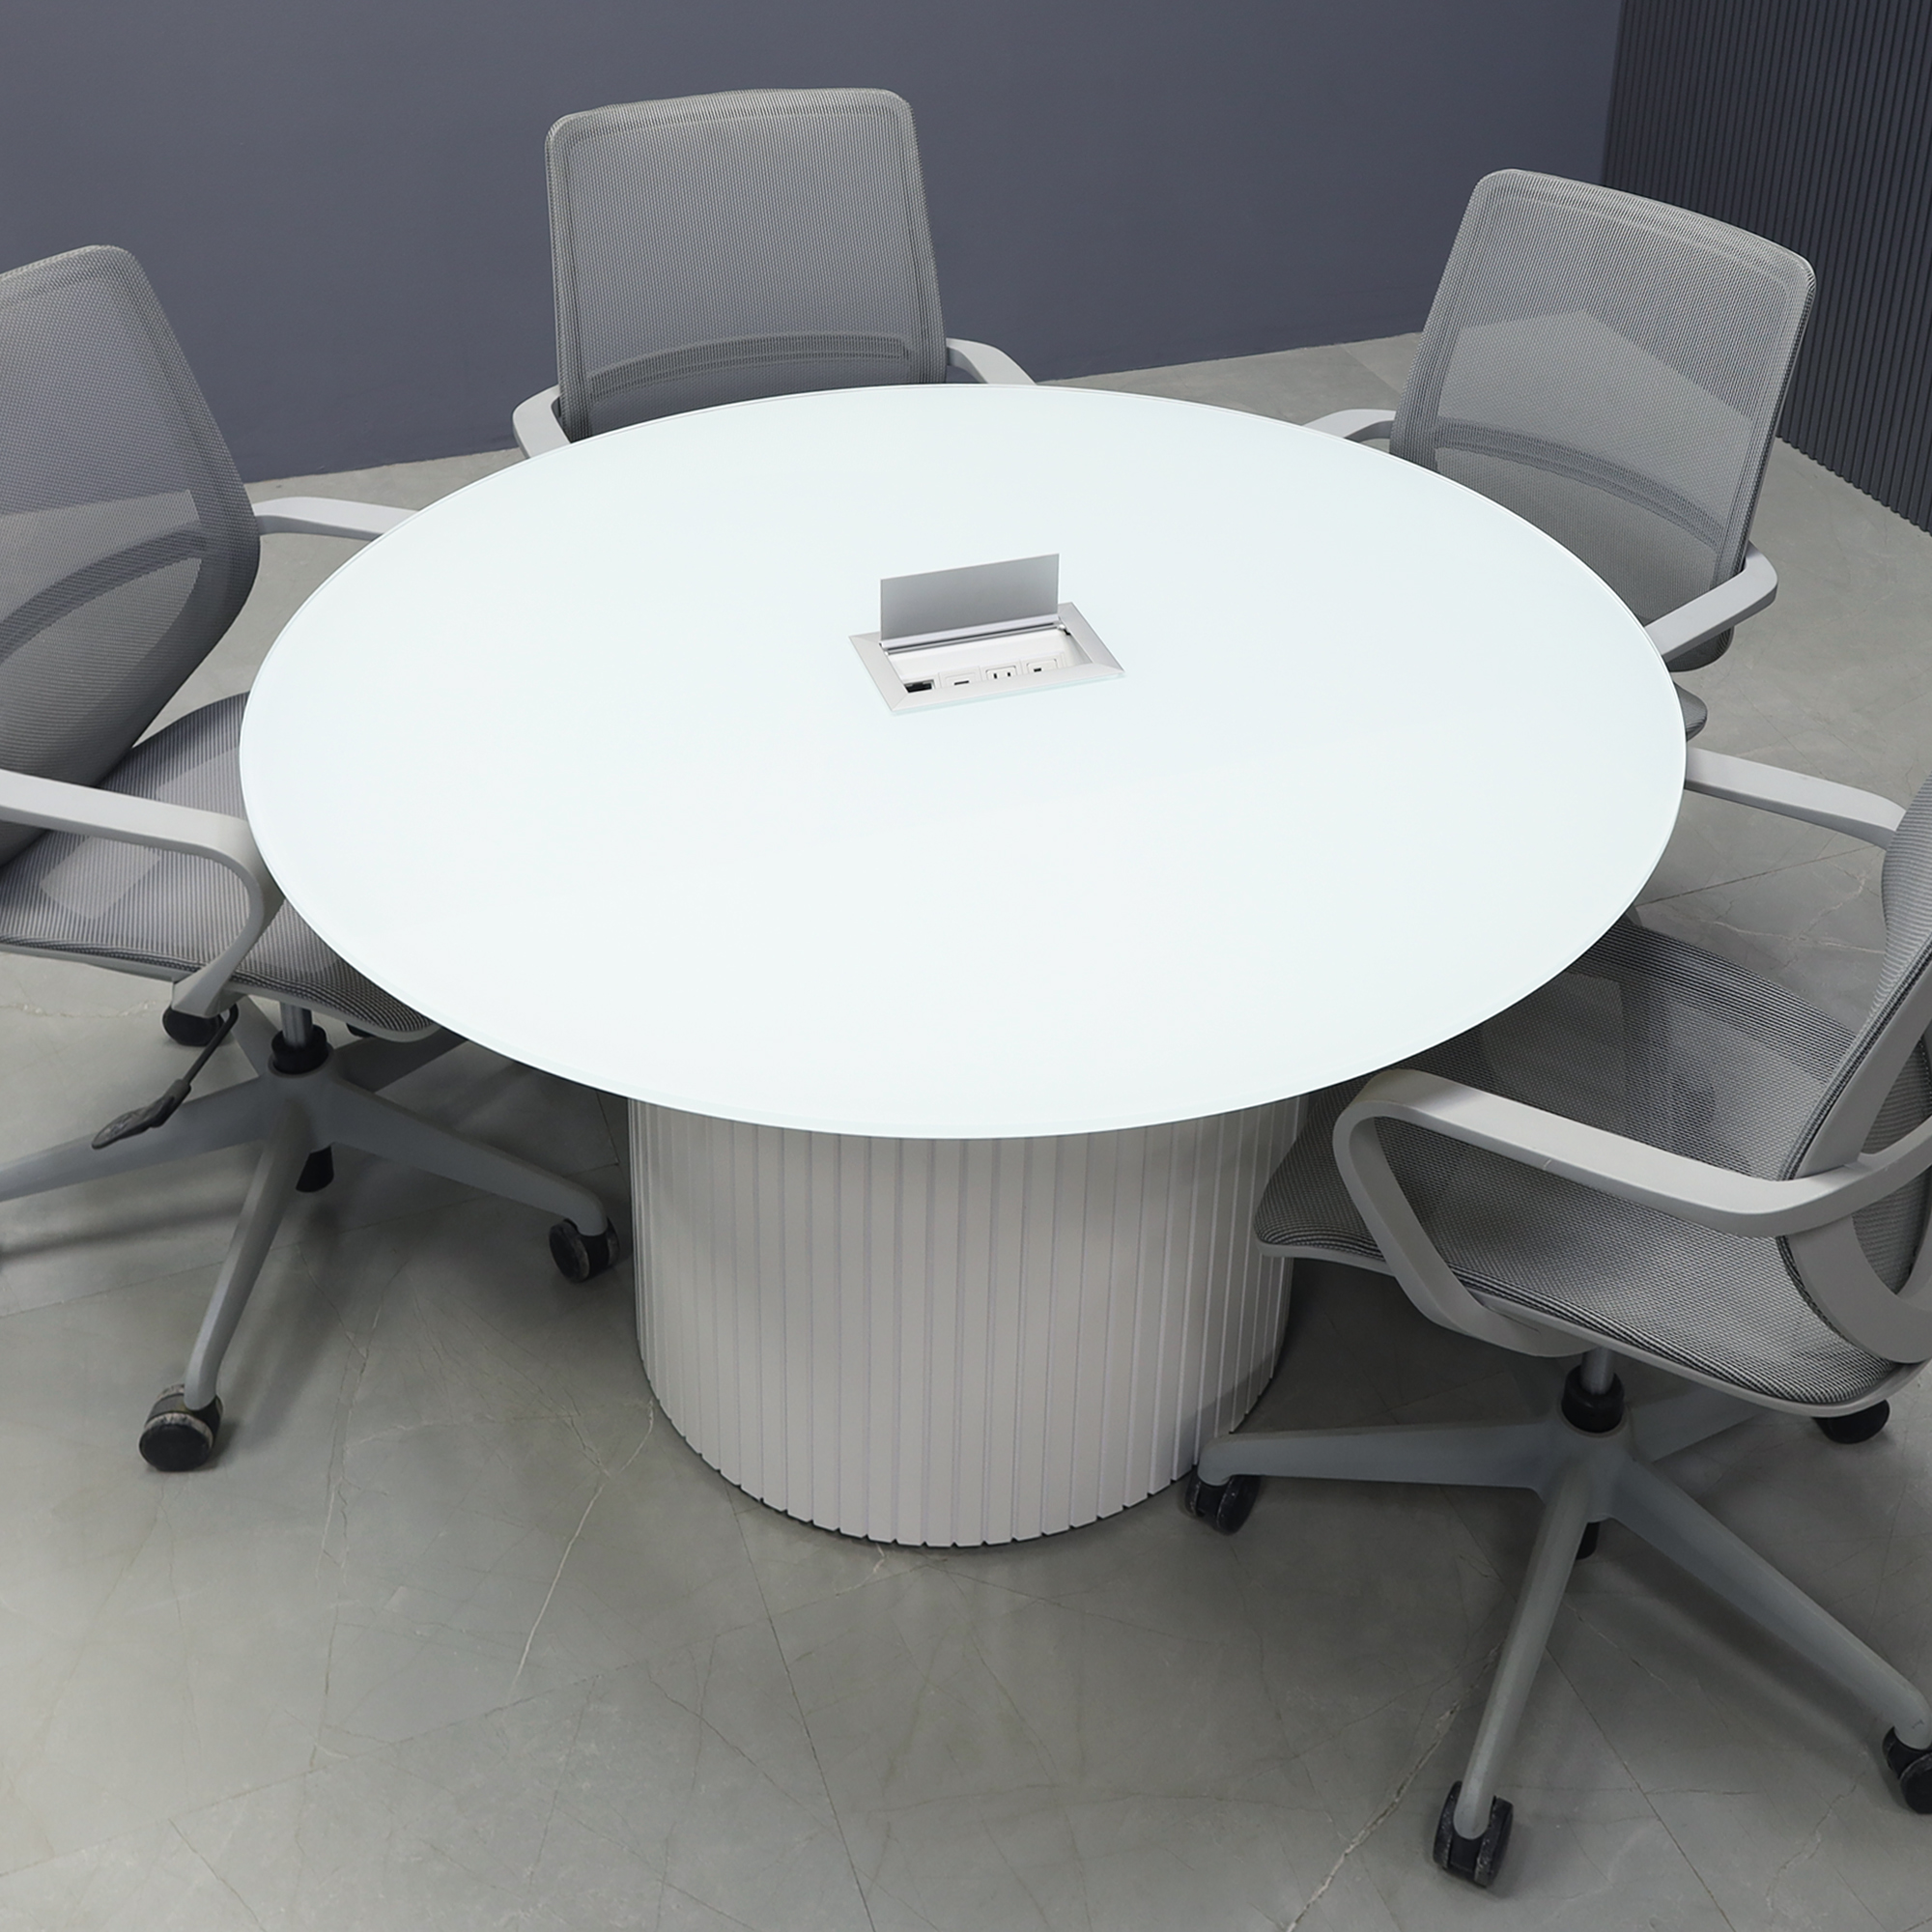 48-inch Omaha Round Conference Table in 1/2